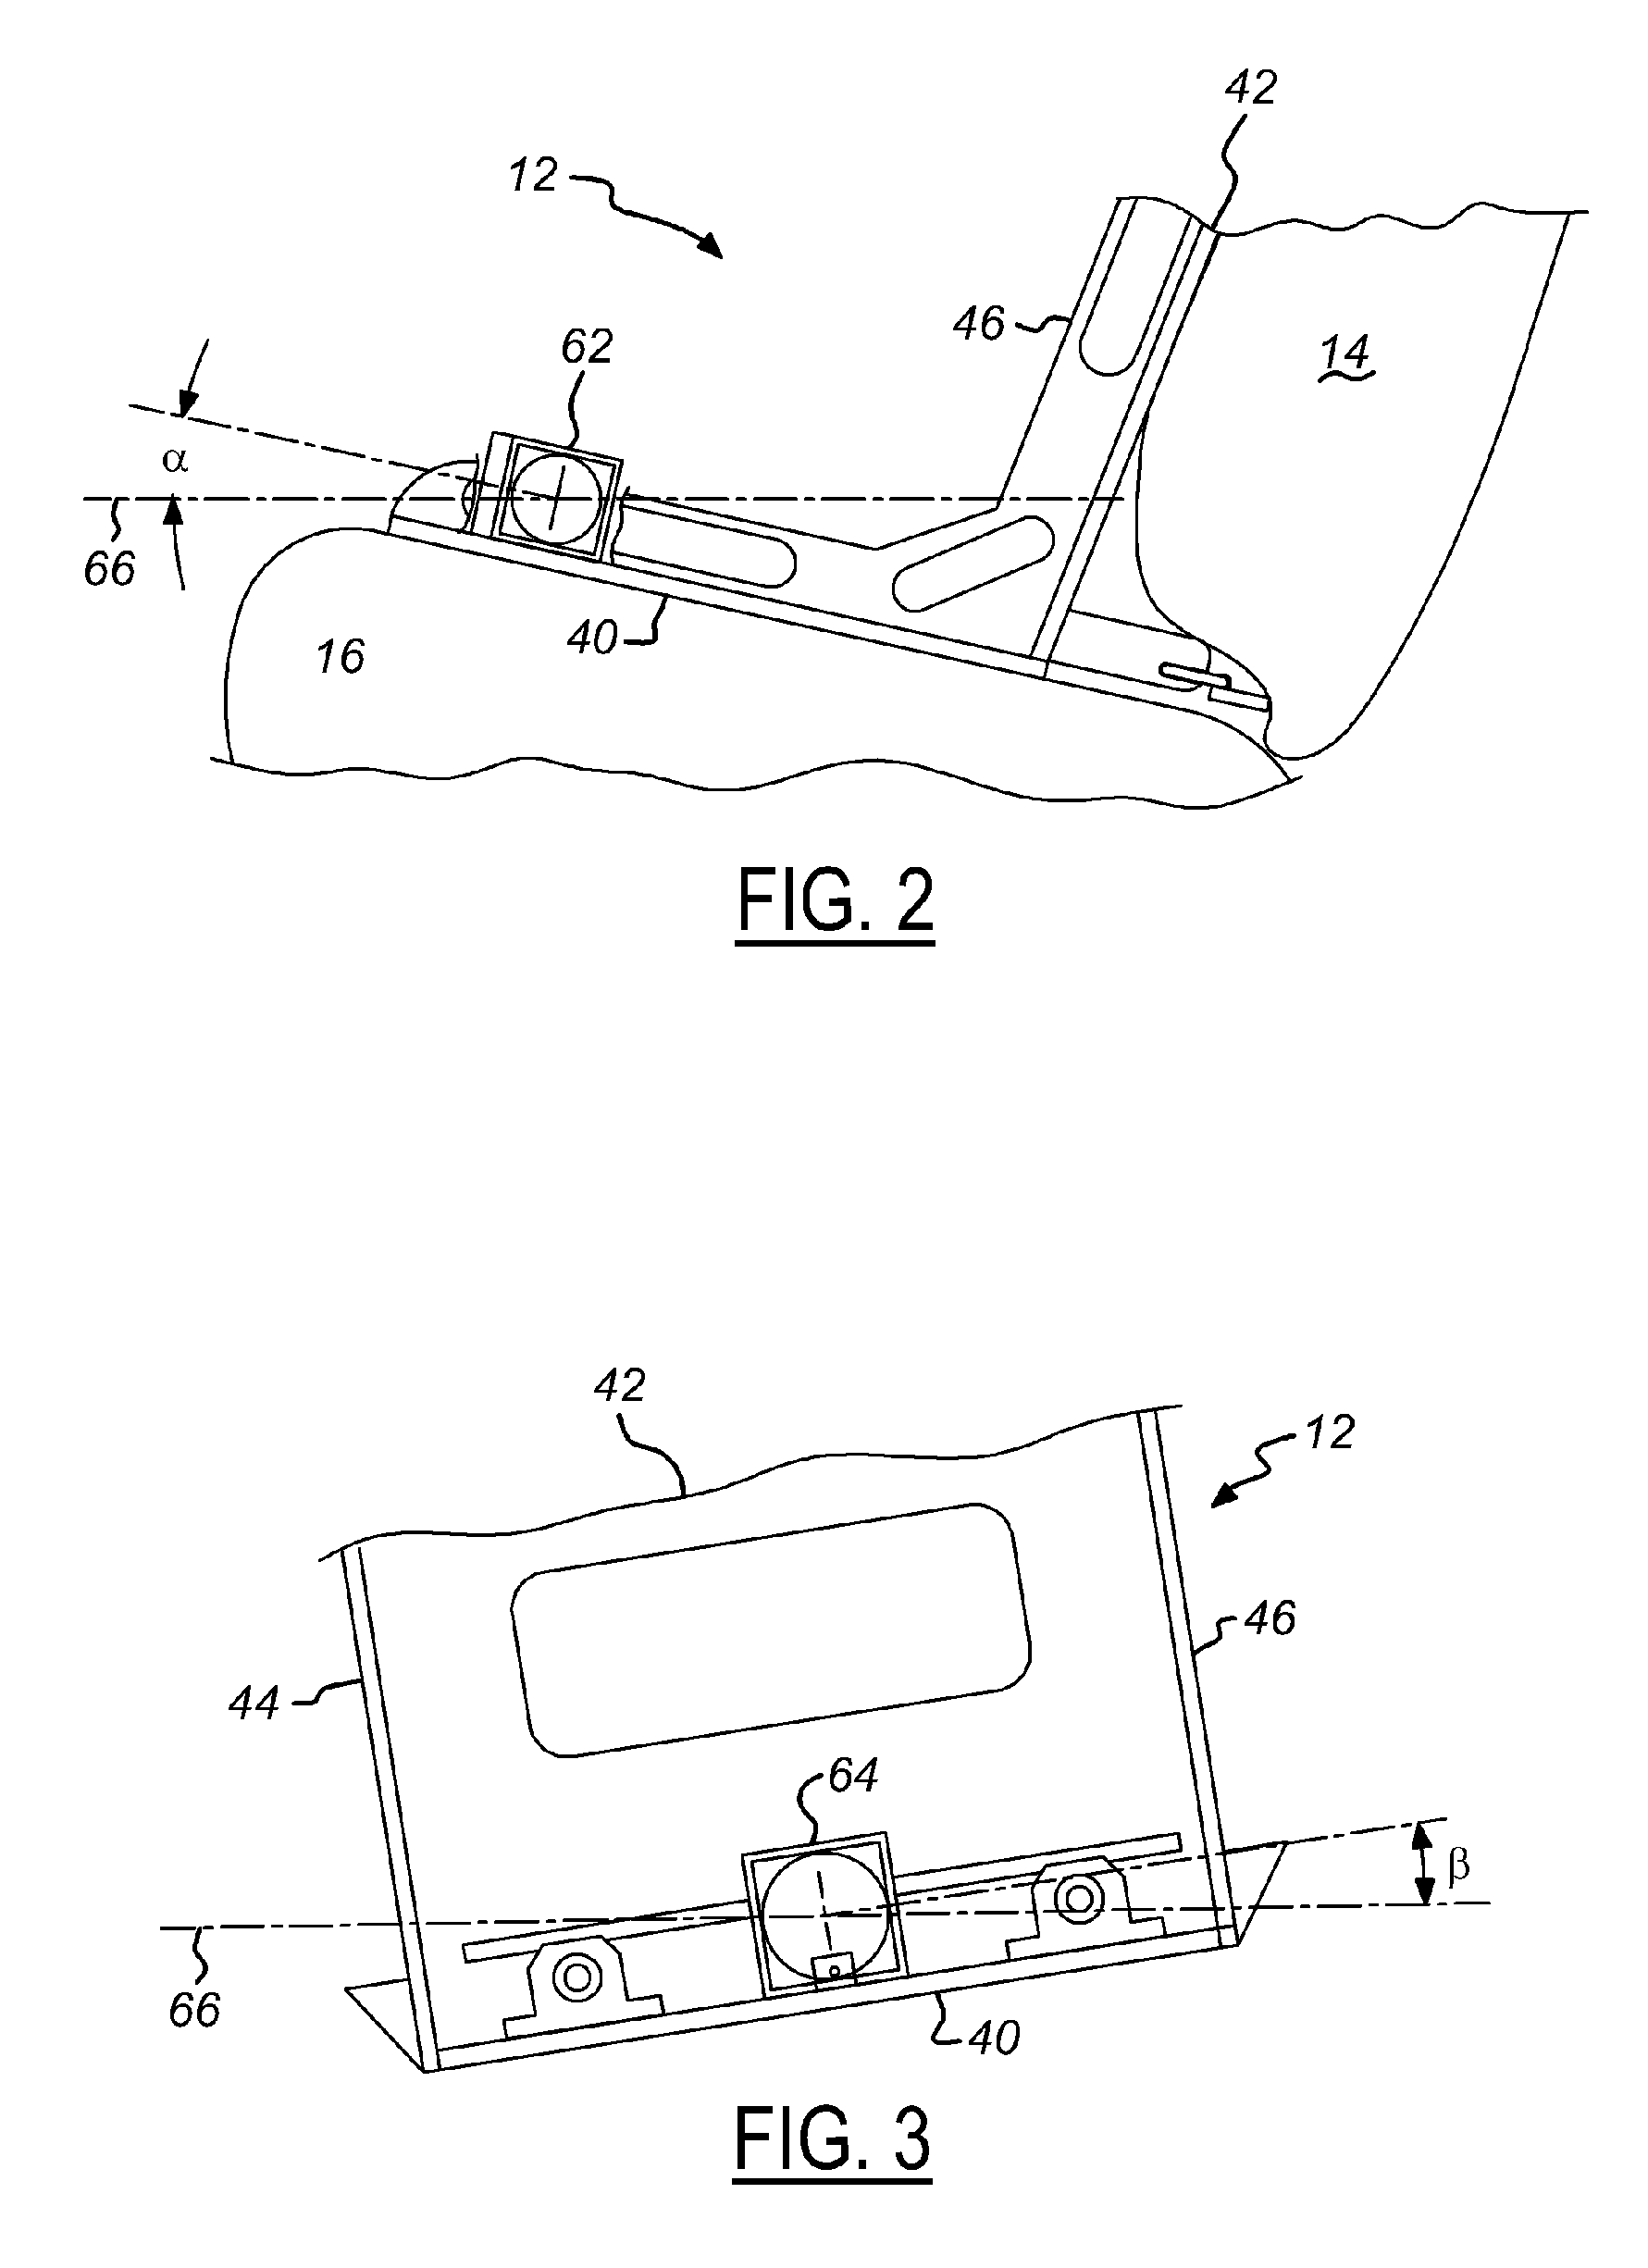 An apparatus and a method for assessing an anchorage position